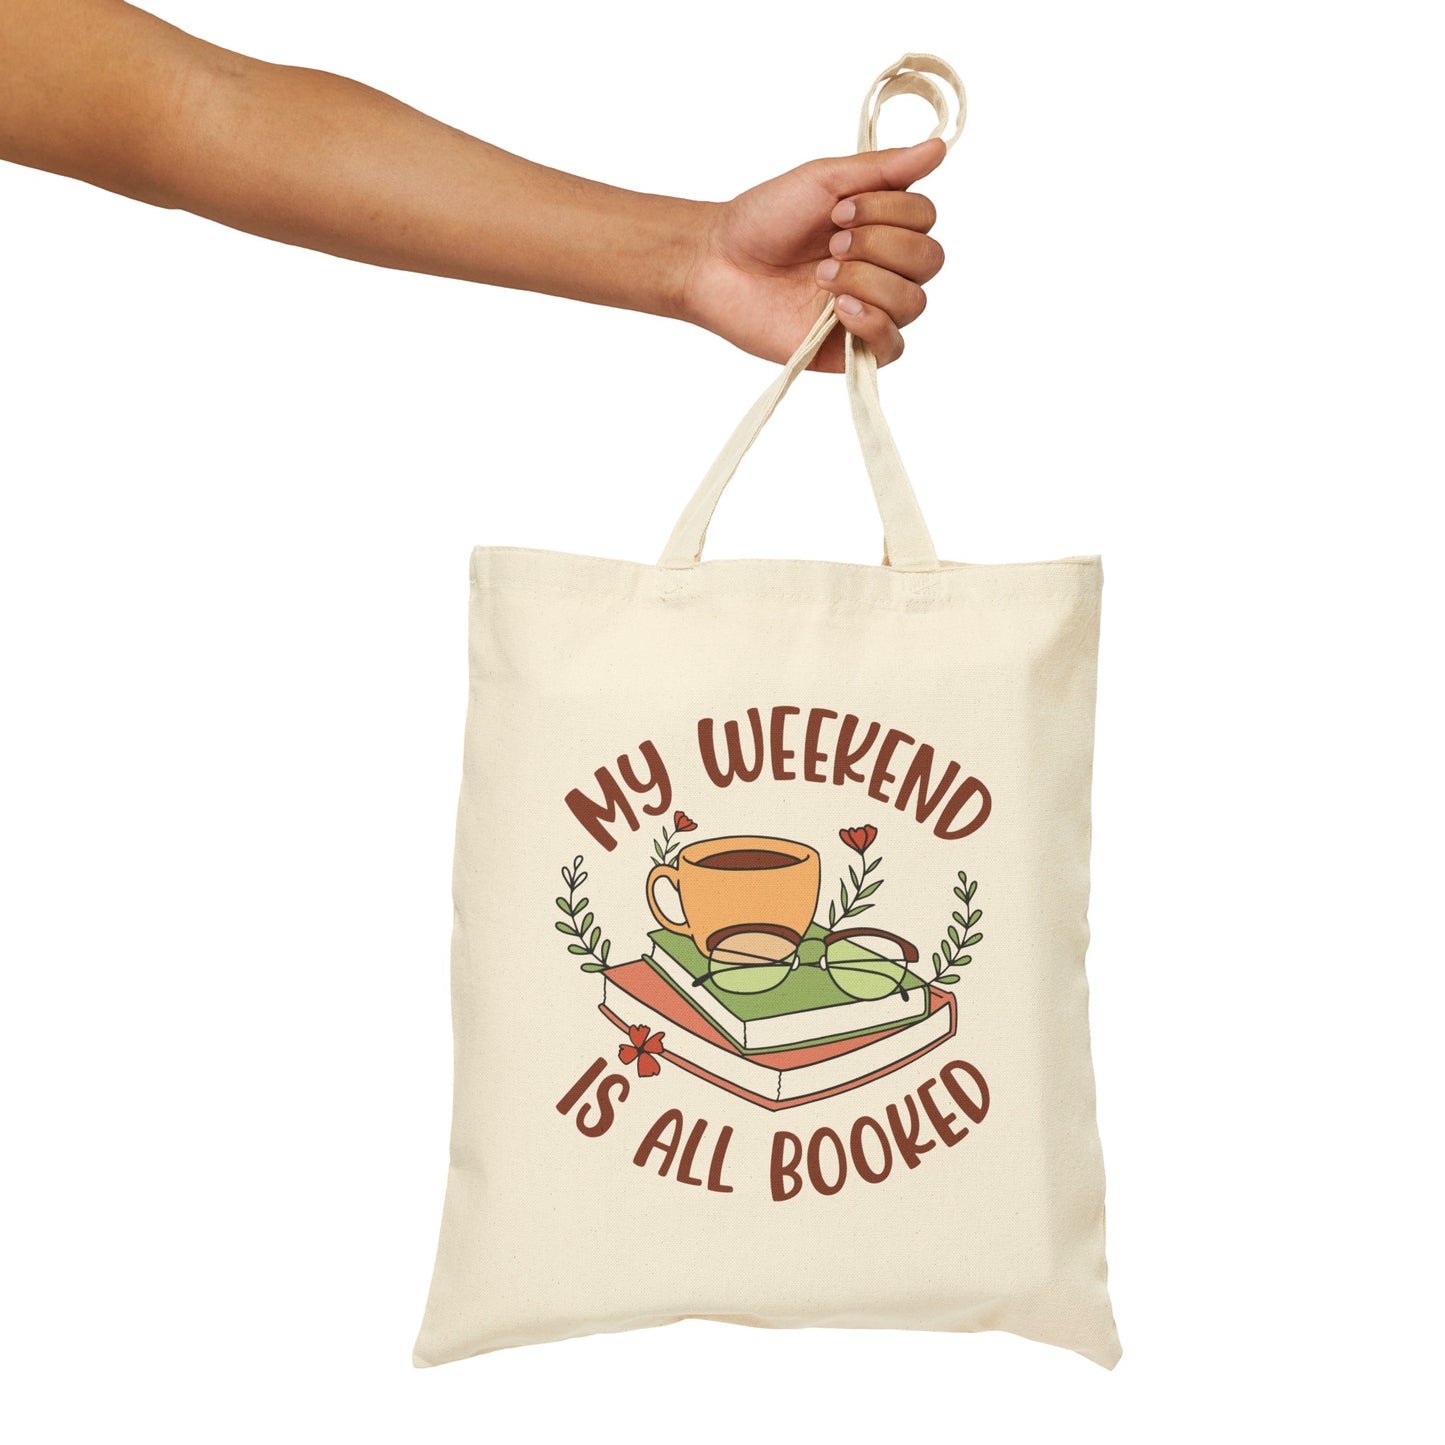 My Weekend Is All Booked Cotton Canvas Tote Bag